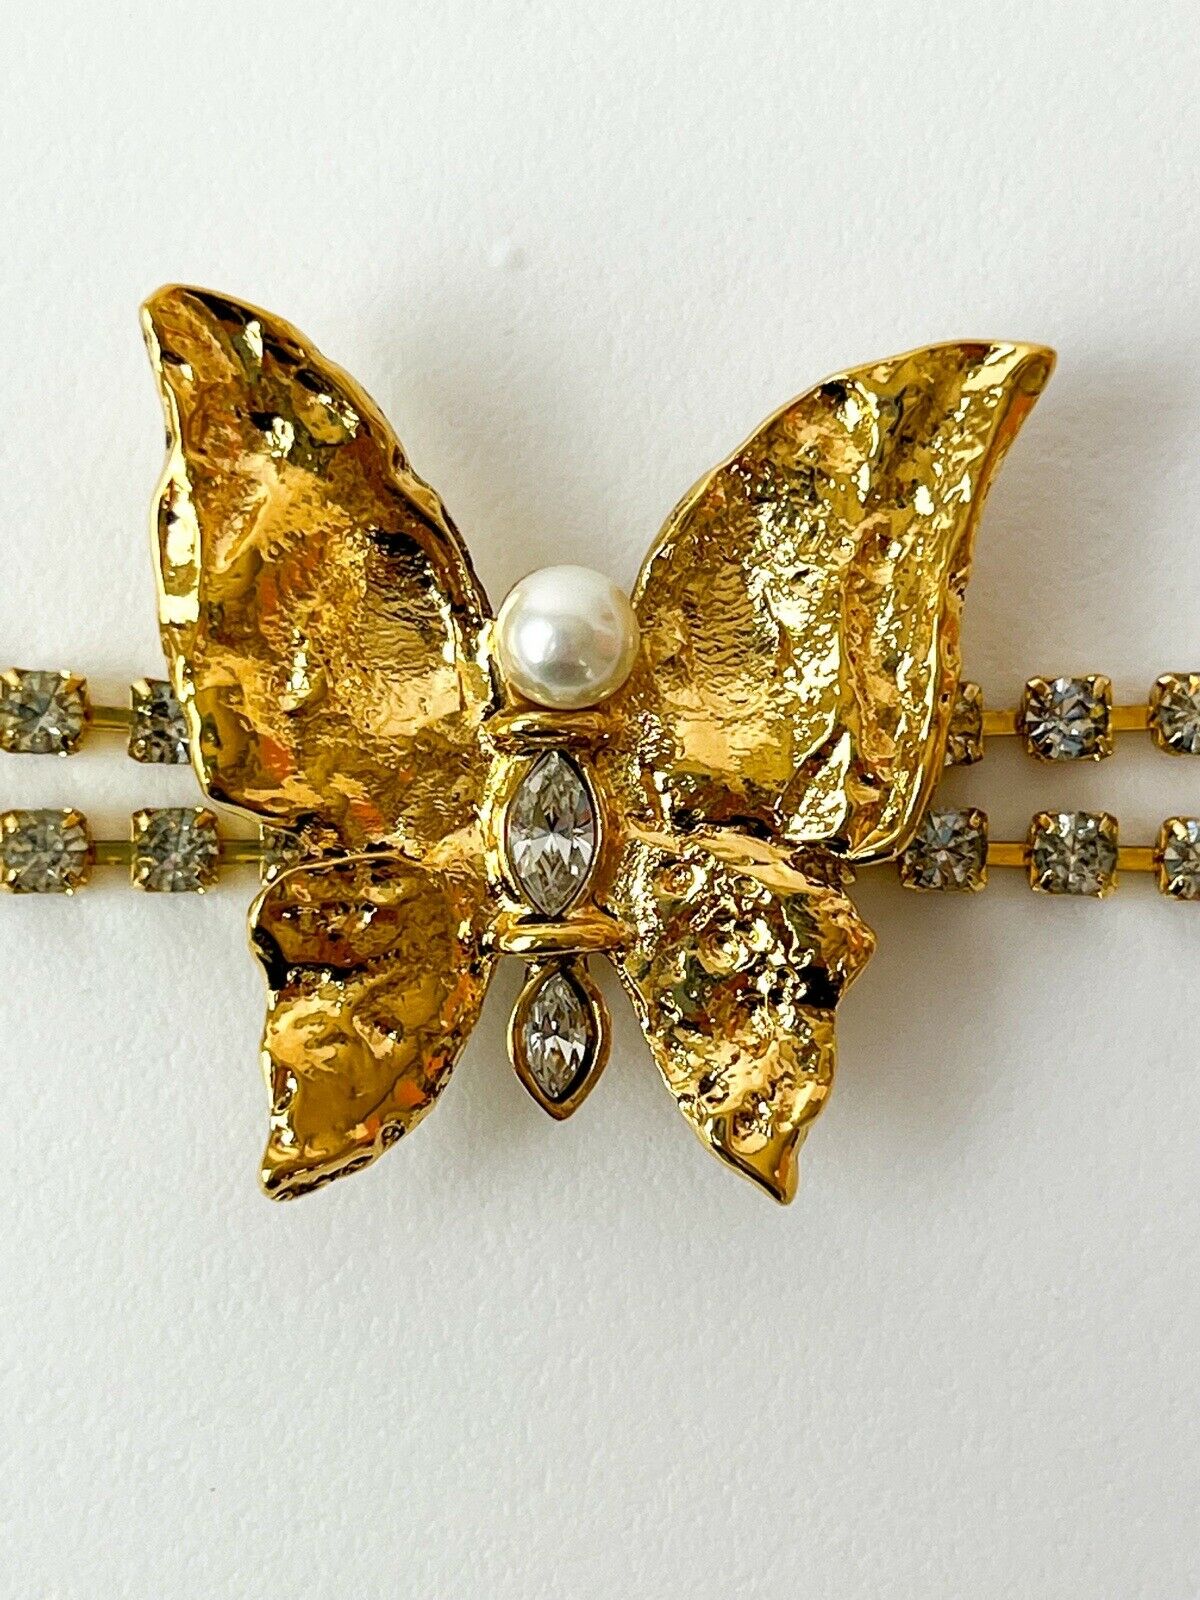 【SOLD OUT】YSL Yves Saint Laurent Vintage Gold Tone Bracelet Butterfly Pearl Crystal